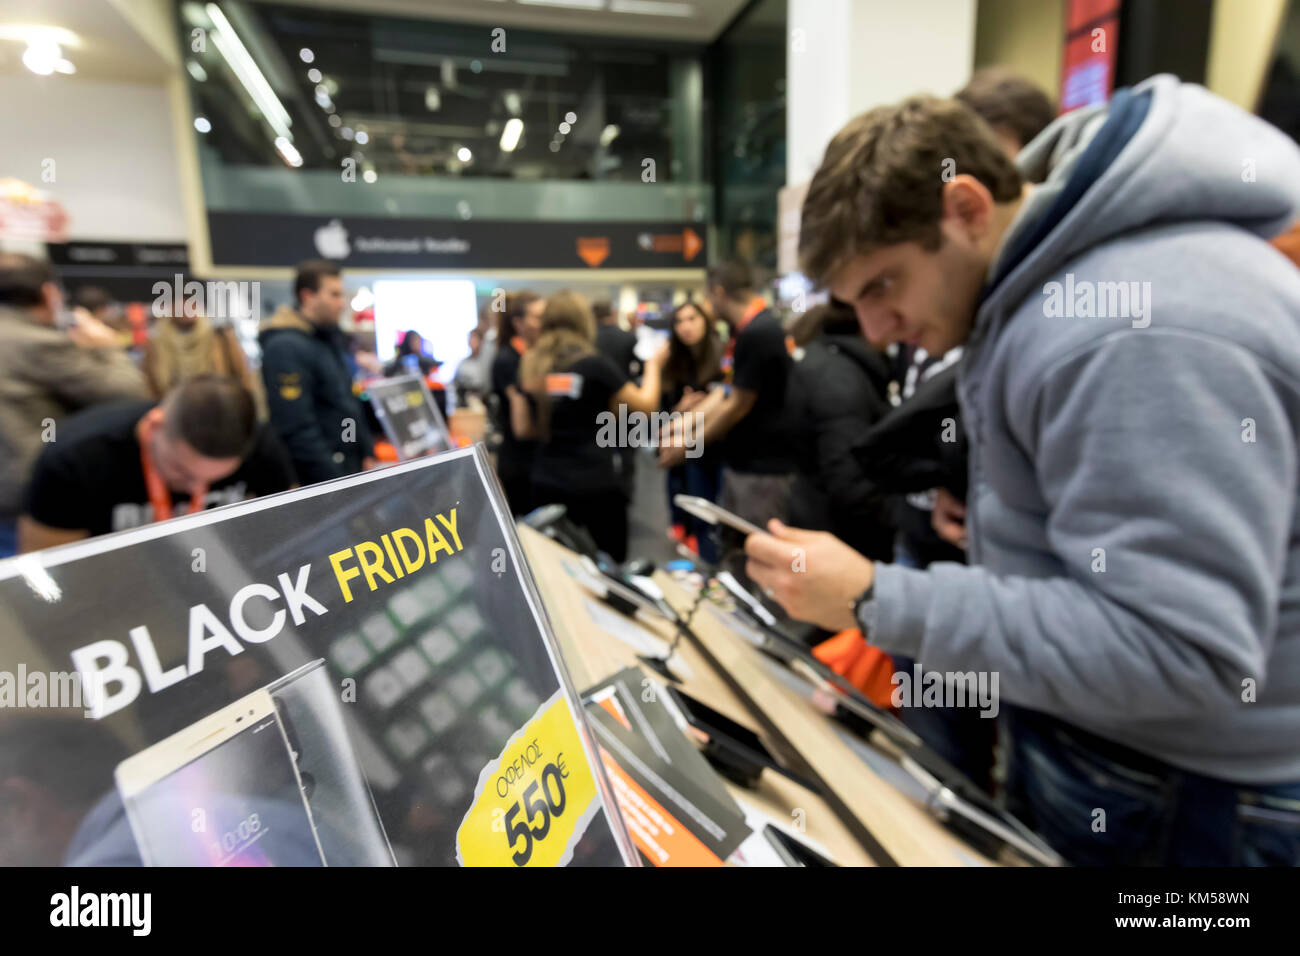 Thessaloniki, Greece - November 24, 2017. People shop inside a department store during Black Friday shopping deals, at the northern Greek city of Thes Stock Photo